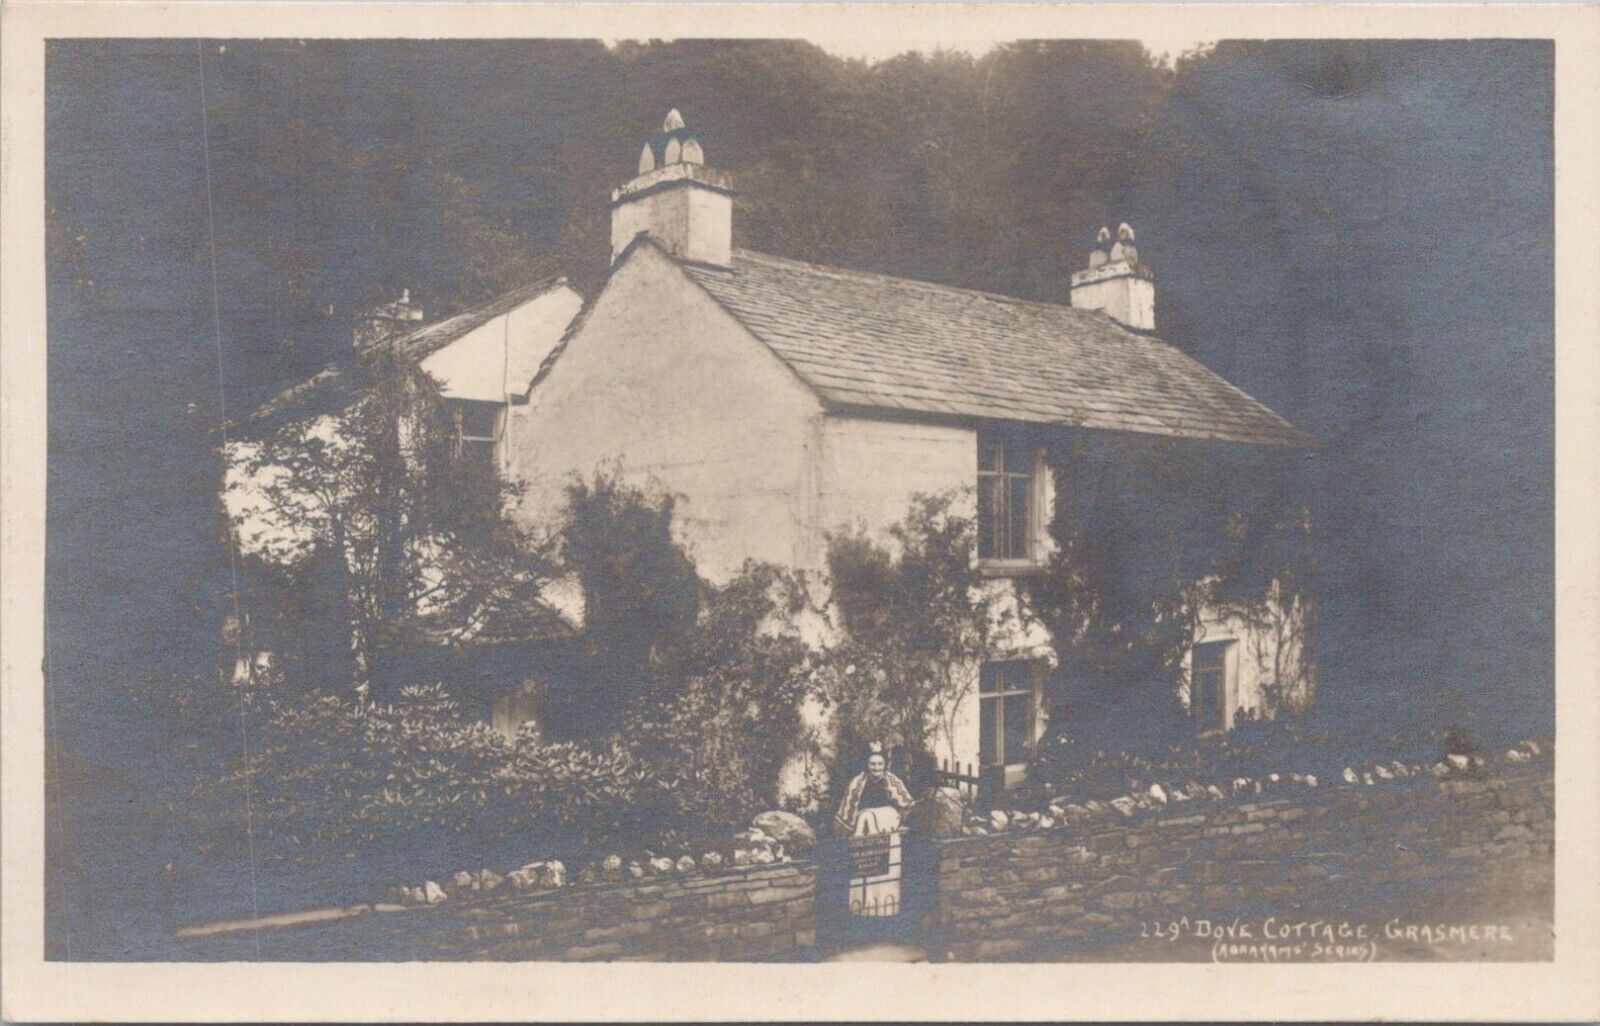 RPPC ** Grasmere England Street Scene at Dove Cottage early 1900s